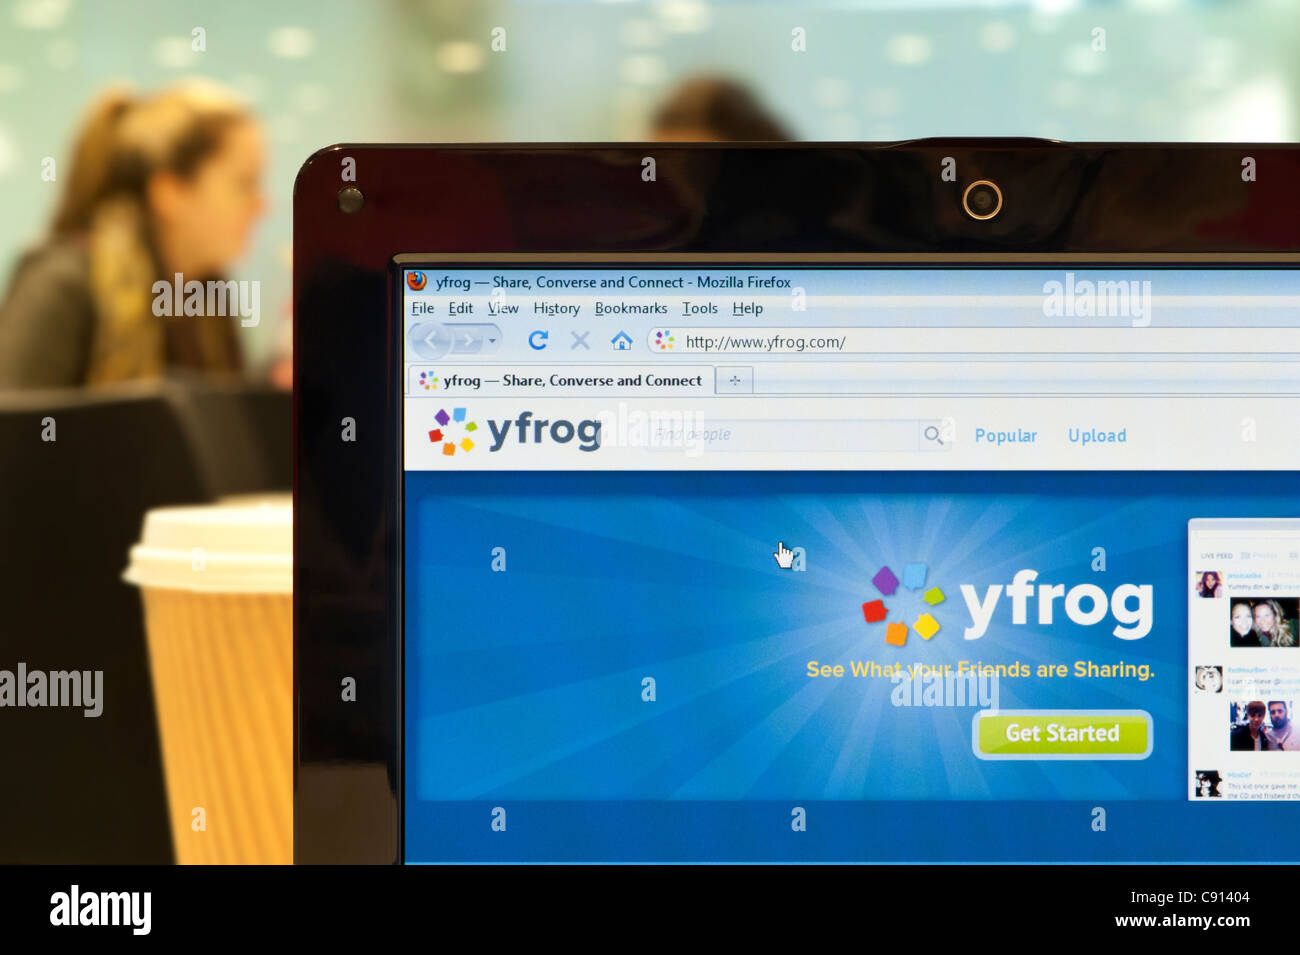 The Yfrog website shot in a coffee shop environment (Editorial use only: print, TV, e-book and editorial website). Stock Photo